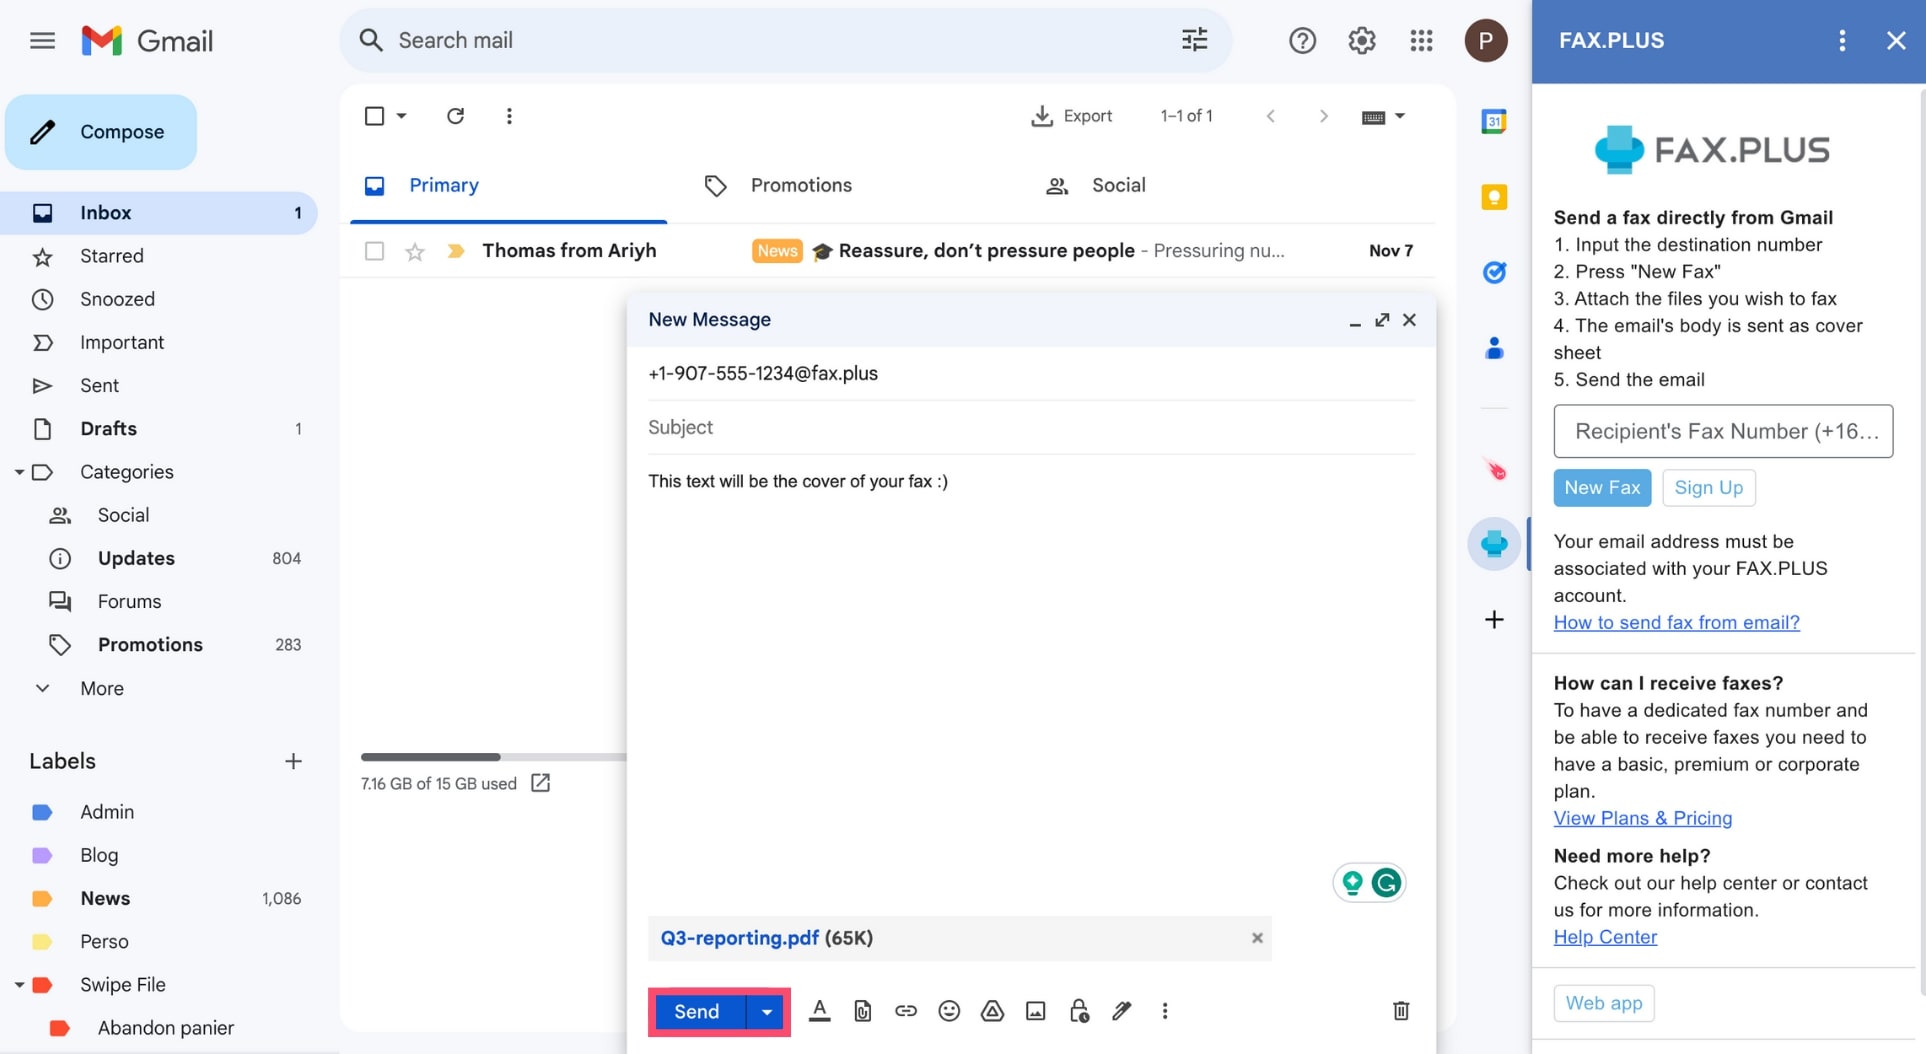 Send your fax directly from Gmail